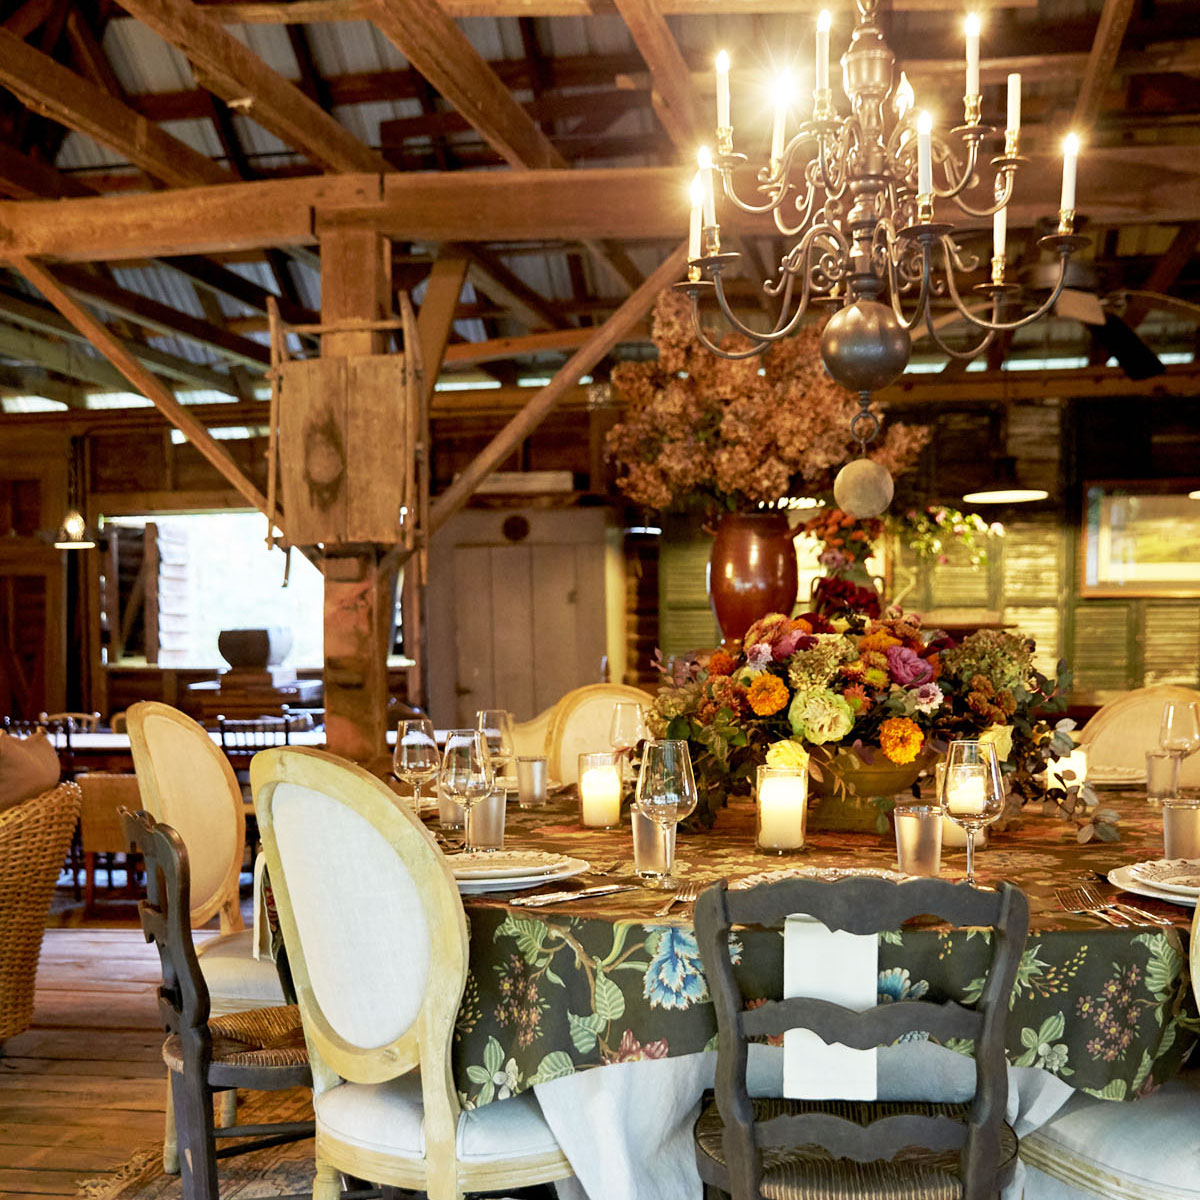 A large display of dried hydrangeas in the background adds seasonal texture inside Keith’s rustic entertaining pavilion. a fresh arrangement sits on the table for a gathering.